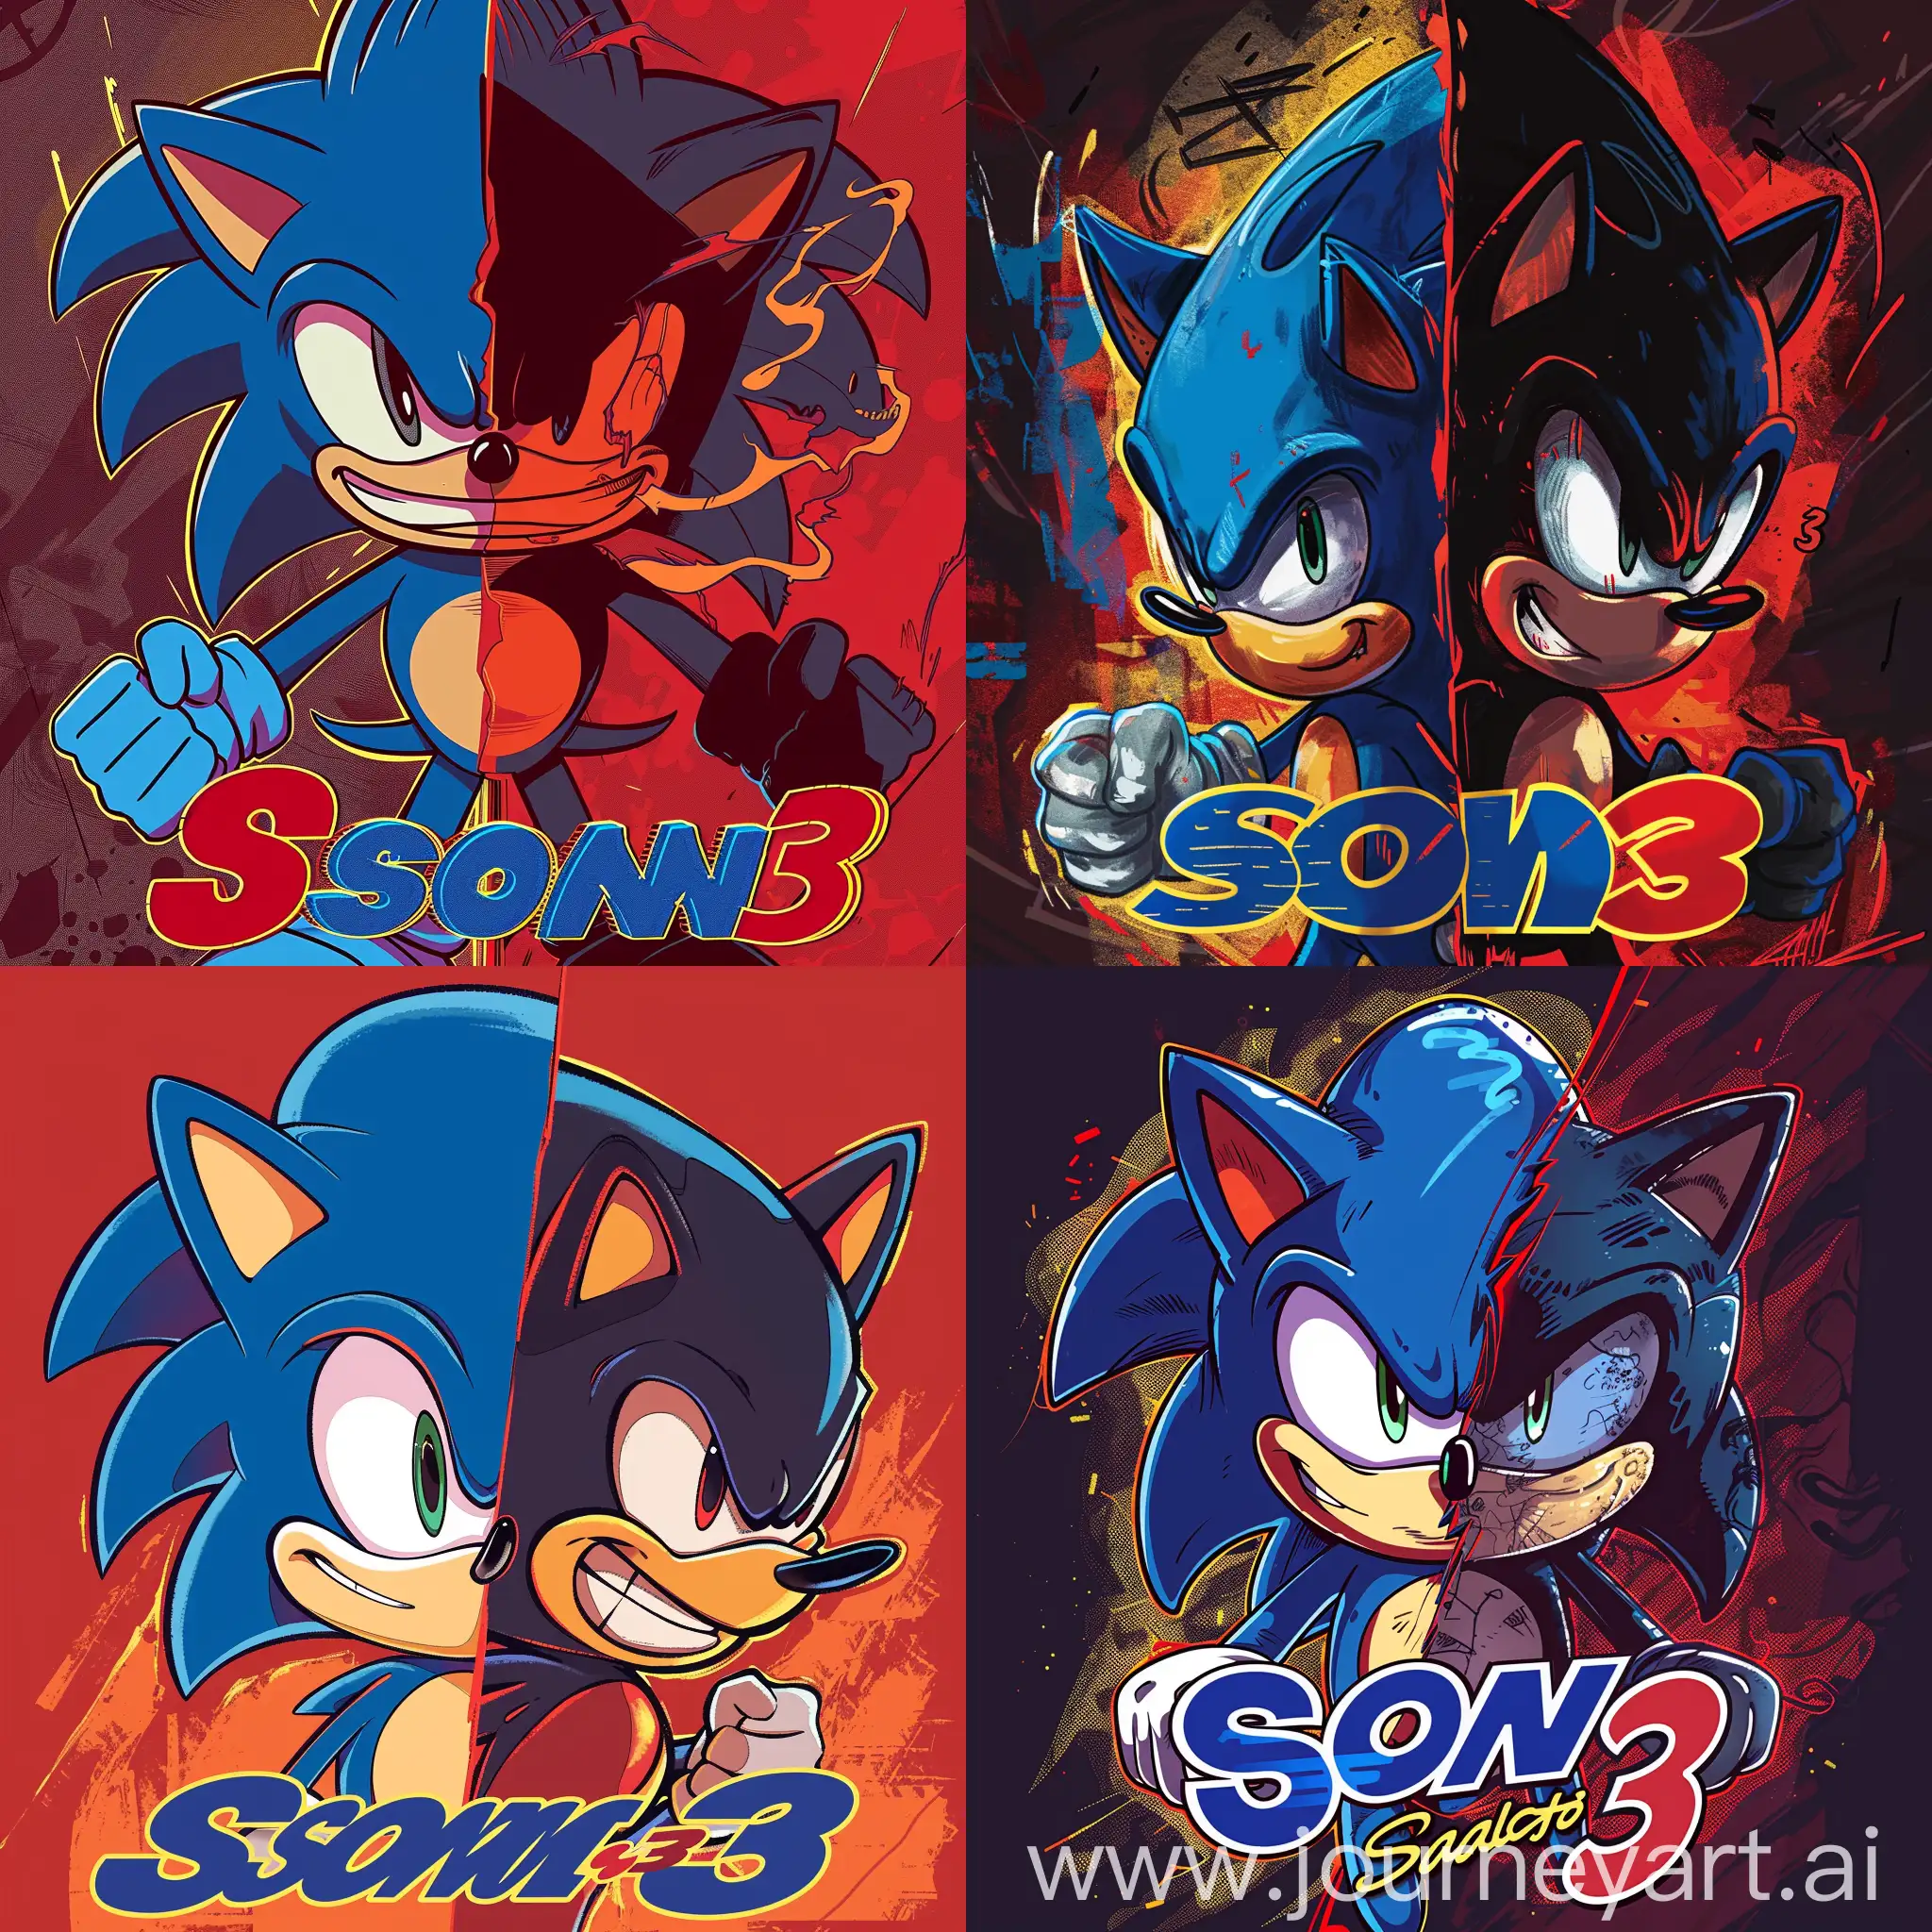 make me a half and half of sonic and shadow the hedgehog face sonic side all happy and blue and shadow dark and red  add text at the bottom saying sonic 3 with the word sonic in blue and a yellow outline and the number 3 in red with a black outline